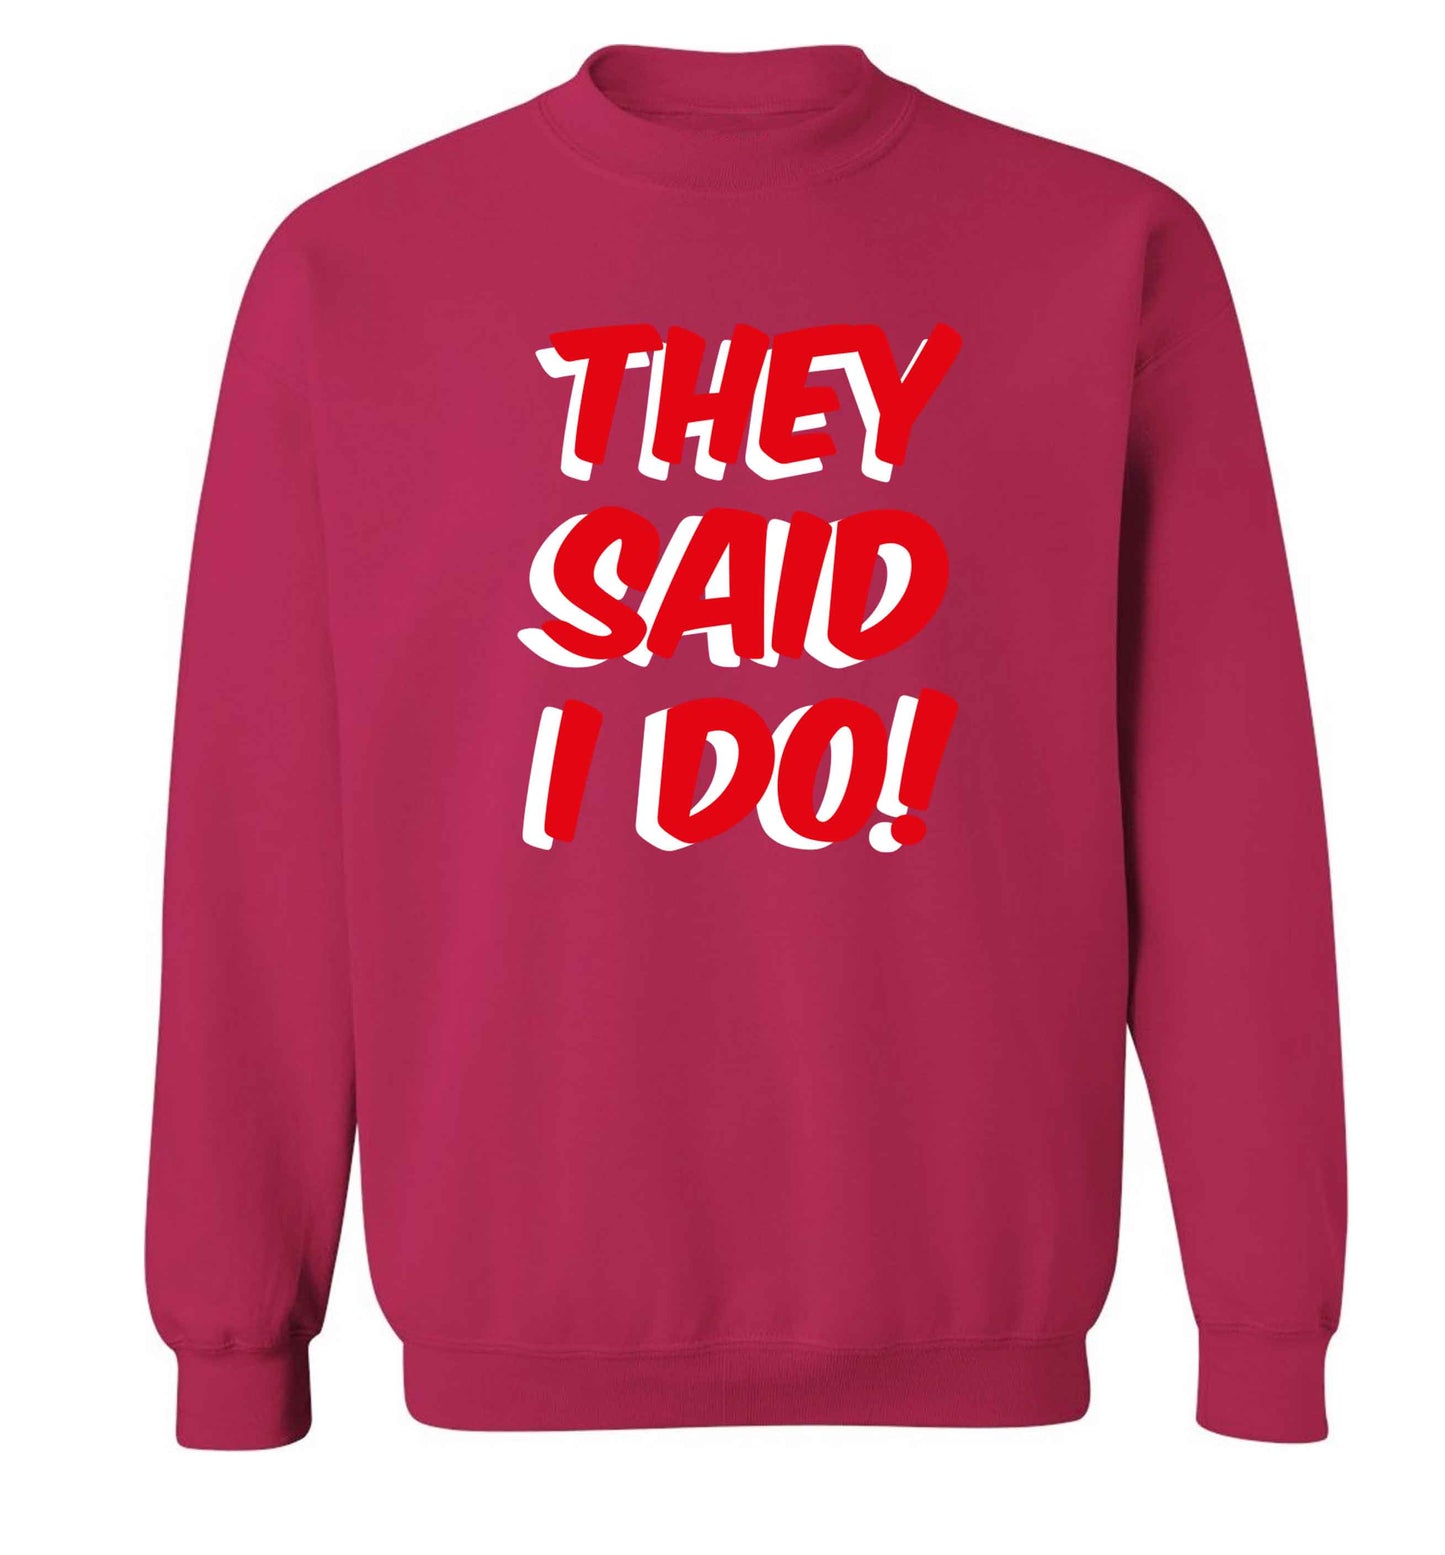 They said I do adult's unisex pink sweater 2XL